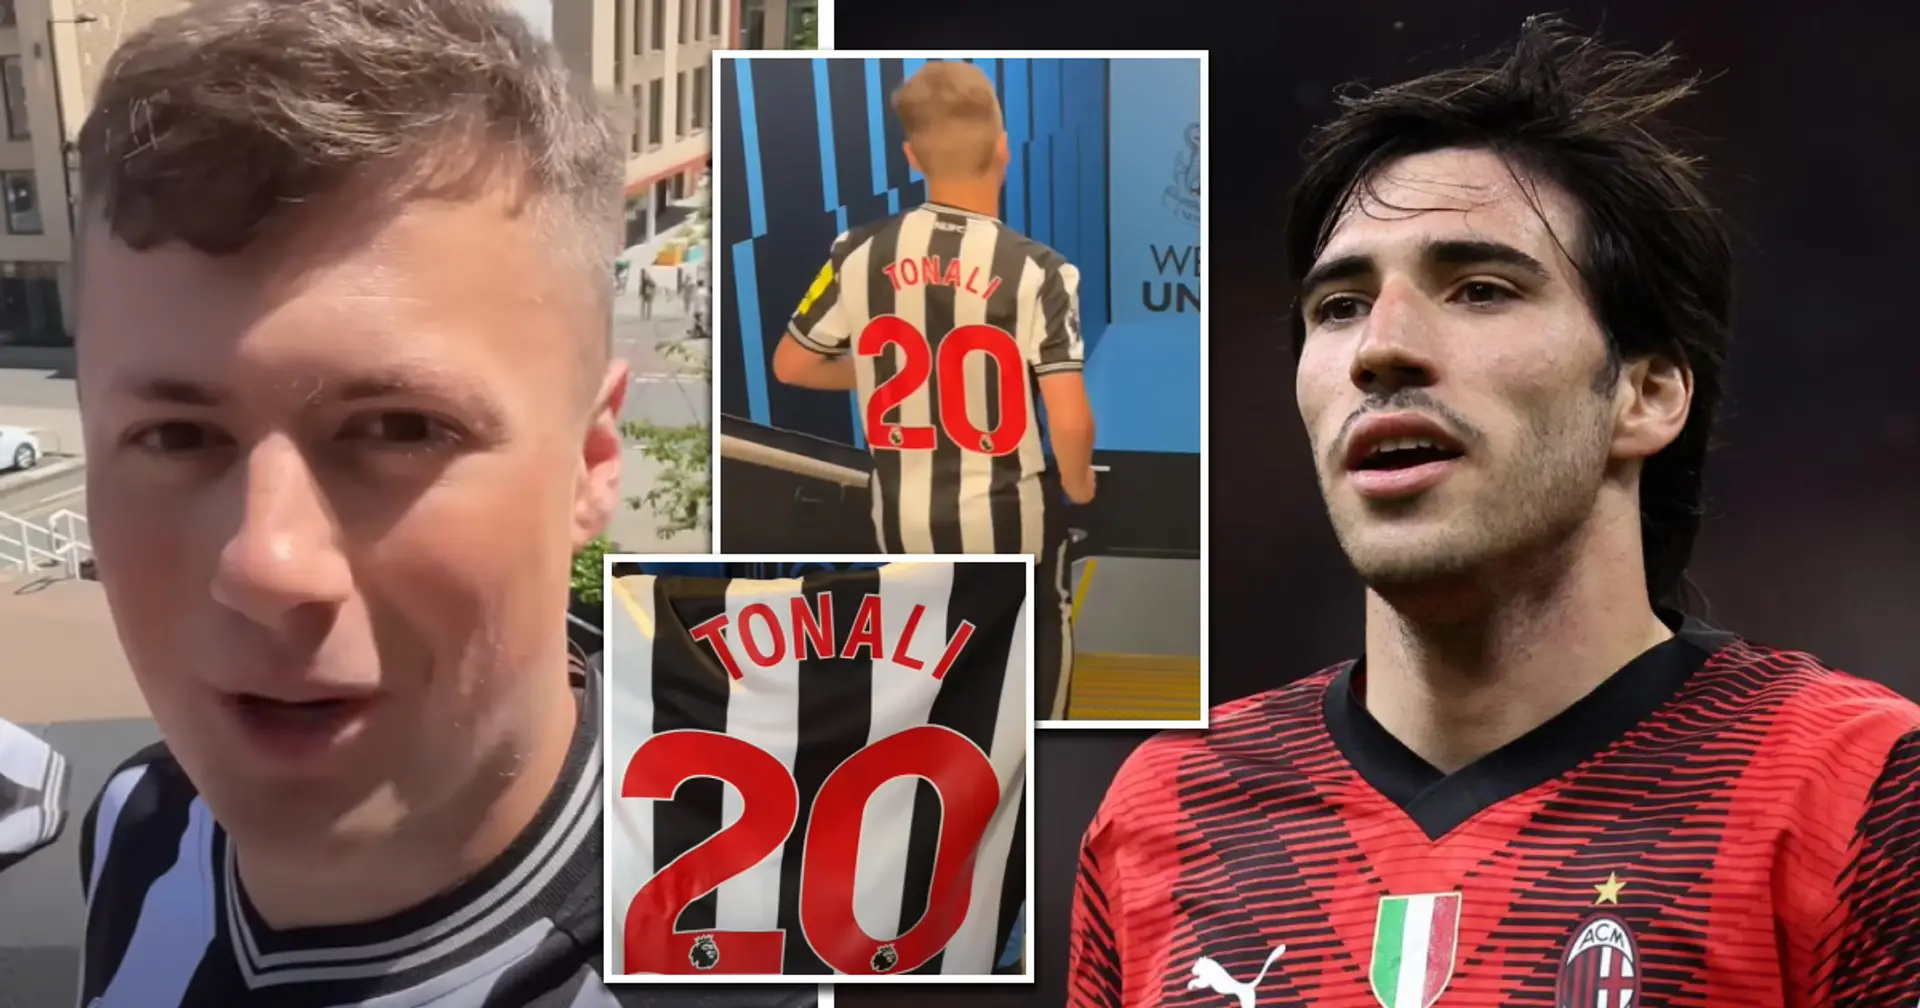 Bold Newcastle fan is so confident will get No.20 he's already bought a shirt from the club shop - Football | Tribuna.com